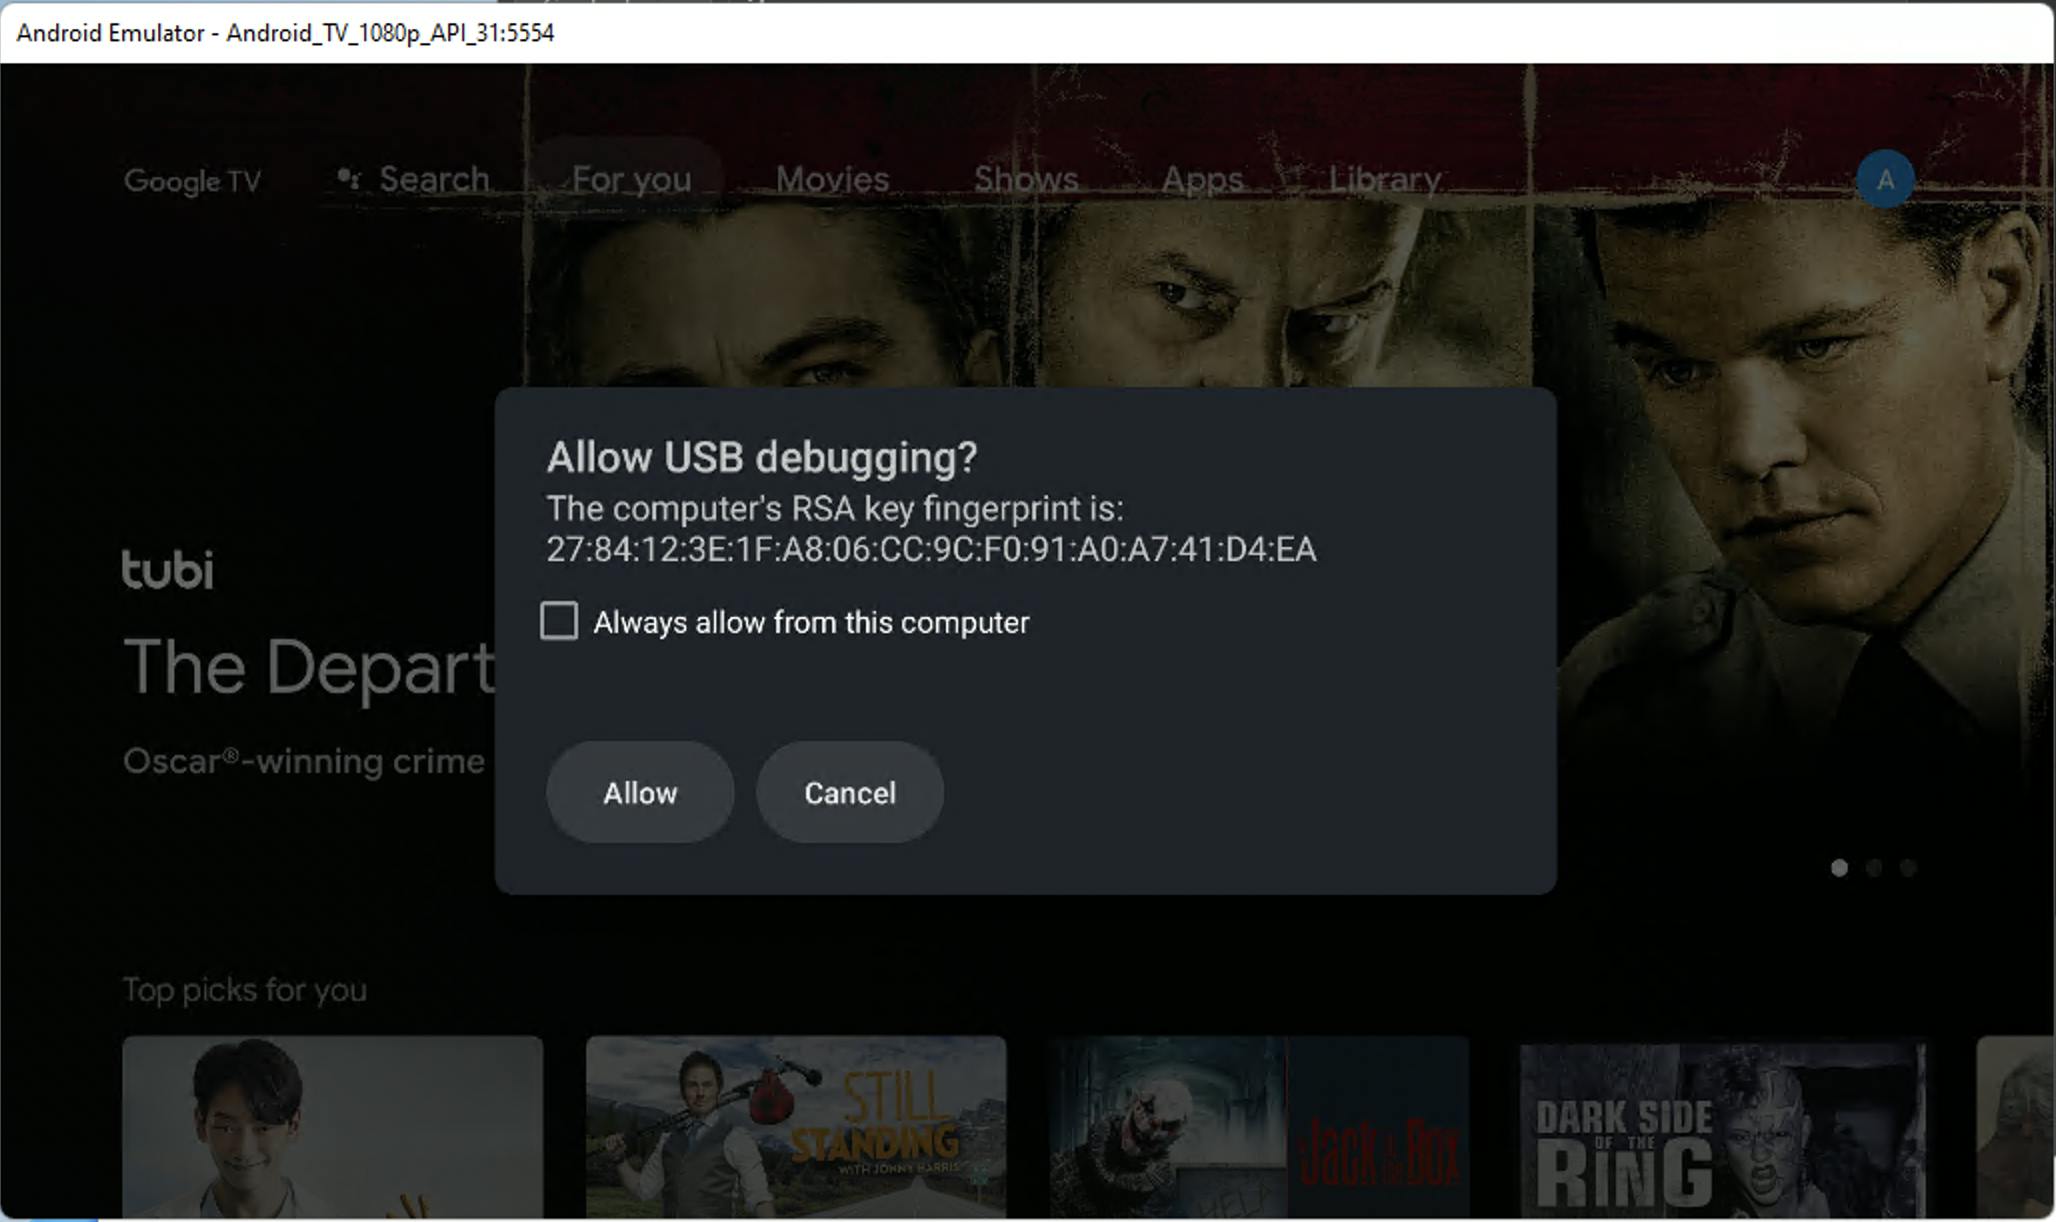 Android TV emulator showing a debug authorization dialog